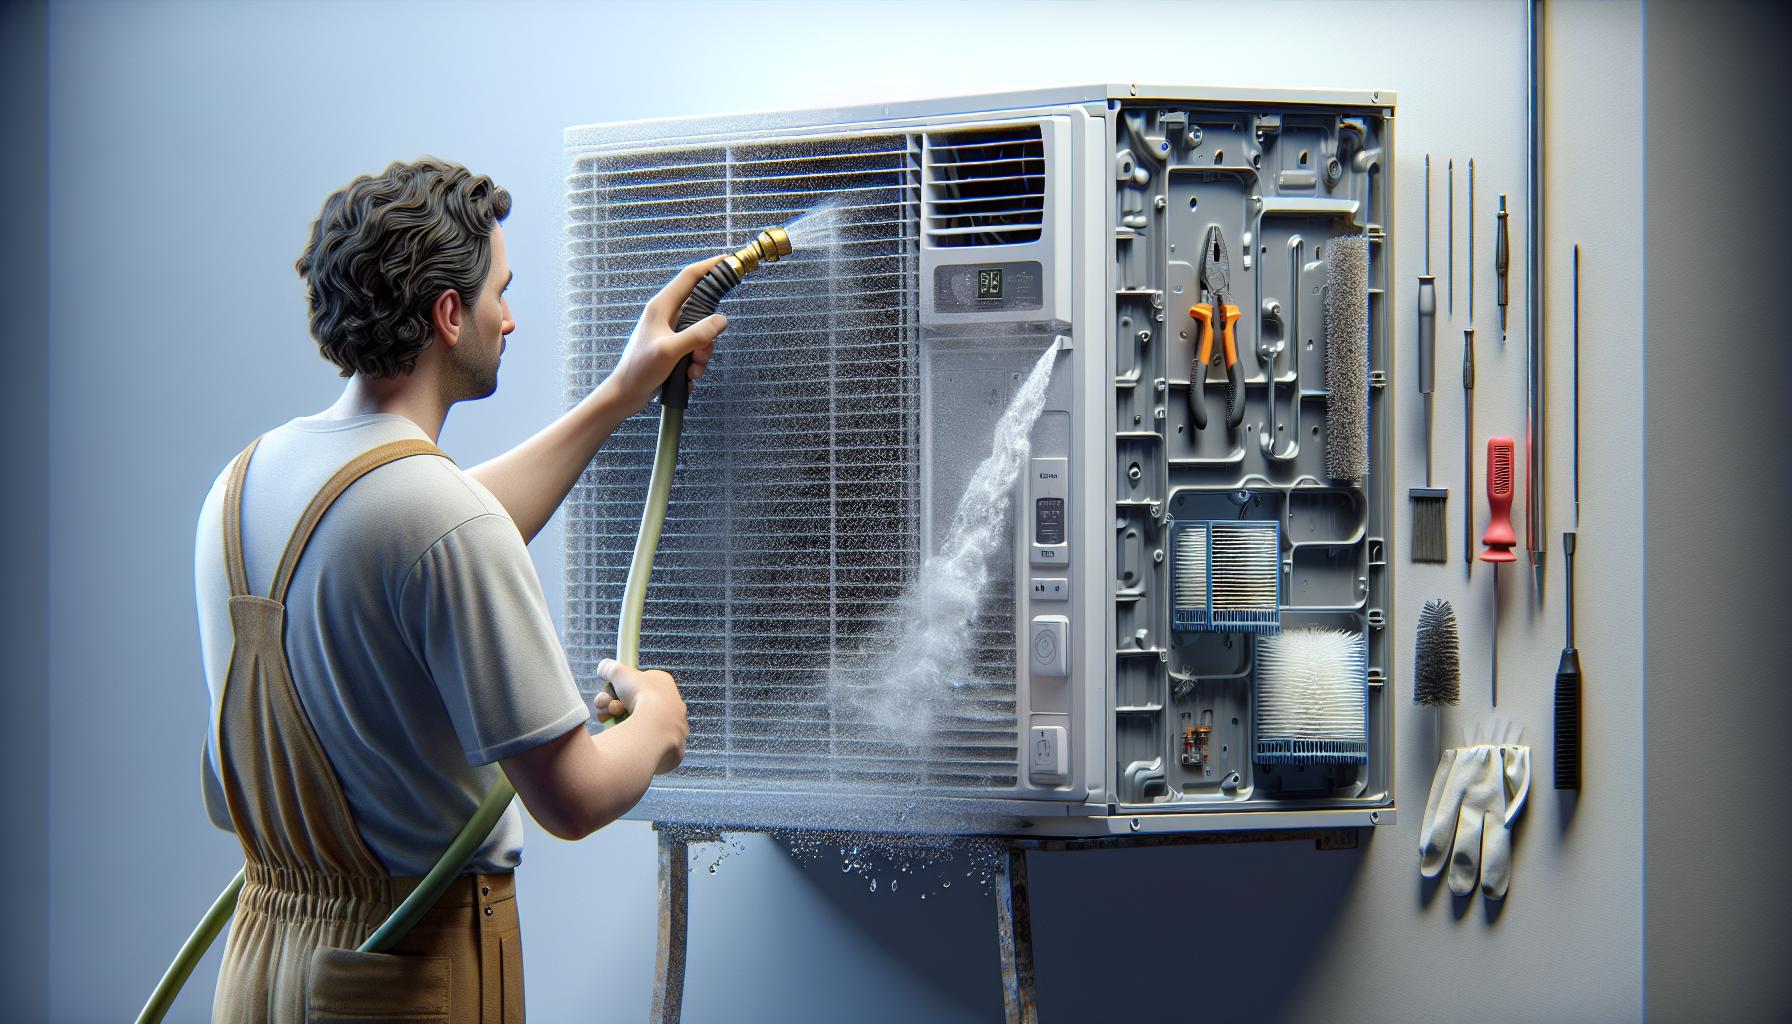 Man cleaning air conditioner unit with brush